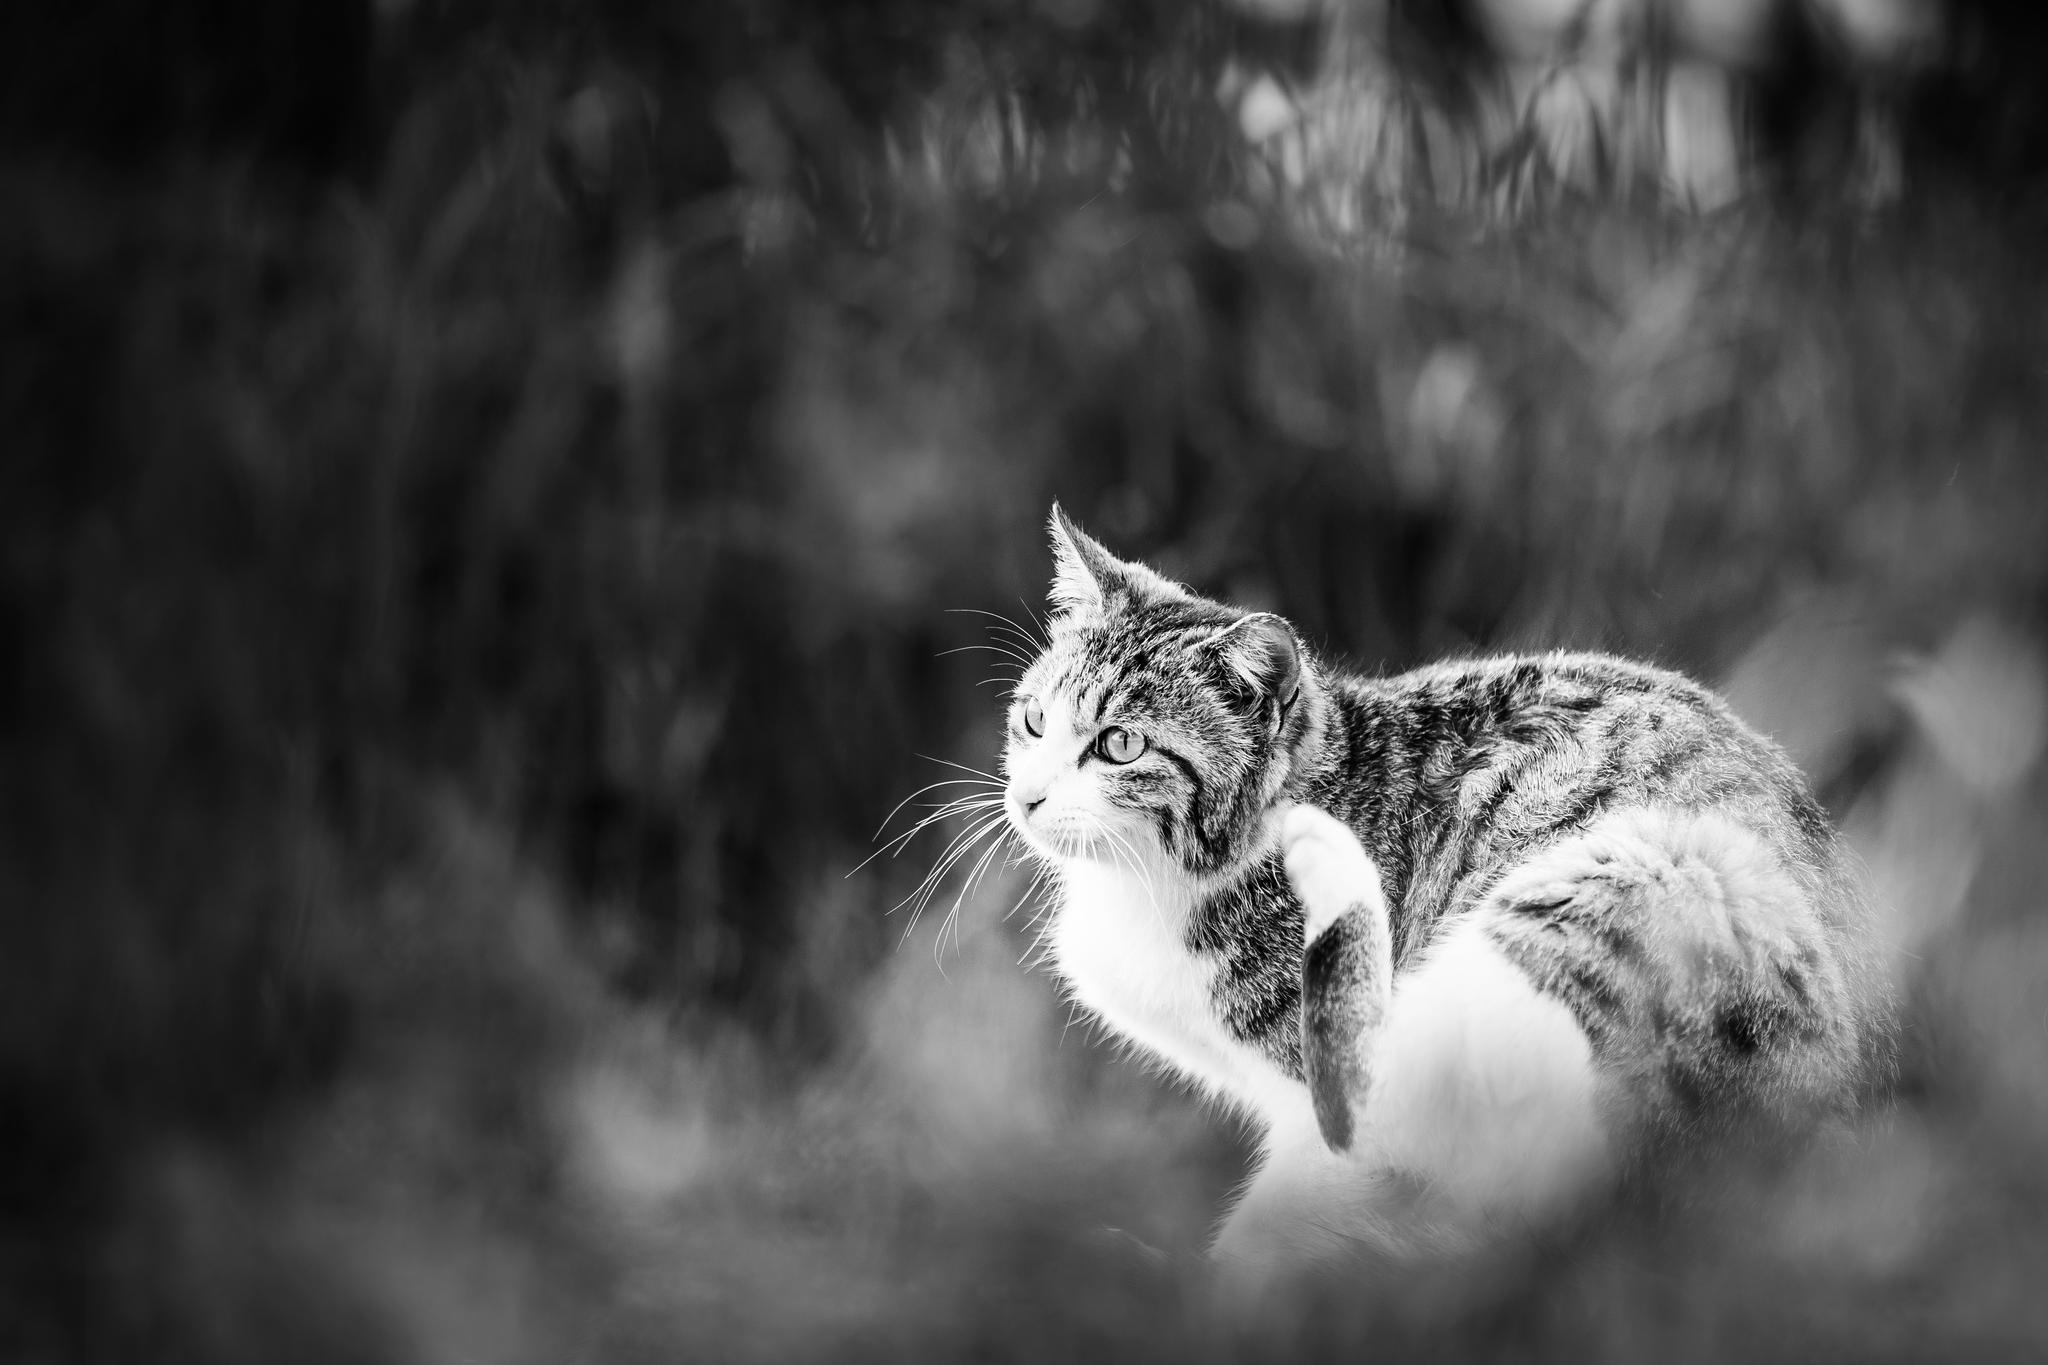 cat wallpaper hd free download,cat,white,black and white,black,whiskers